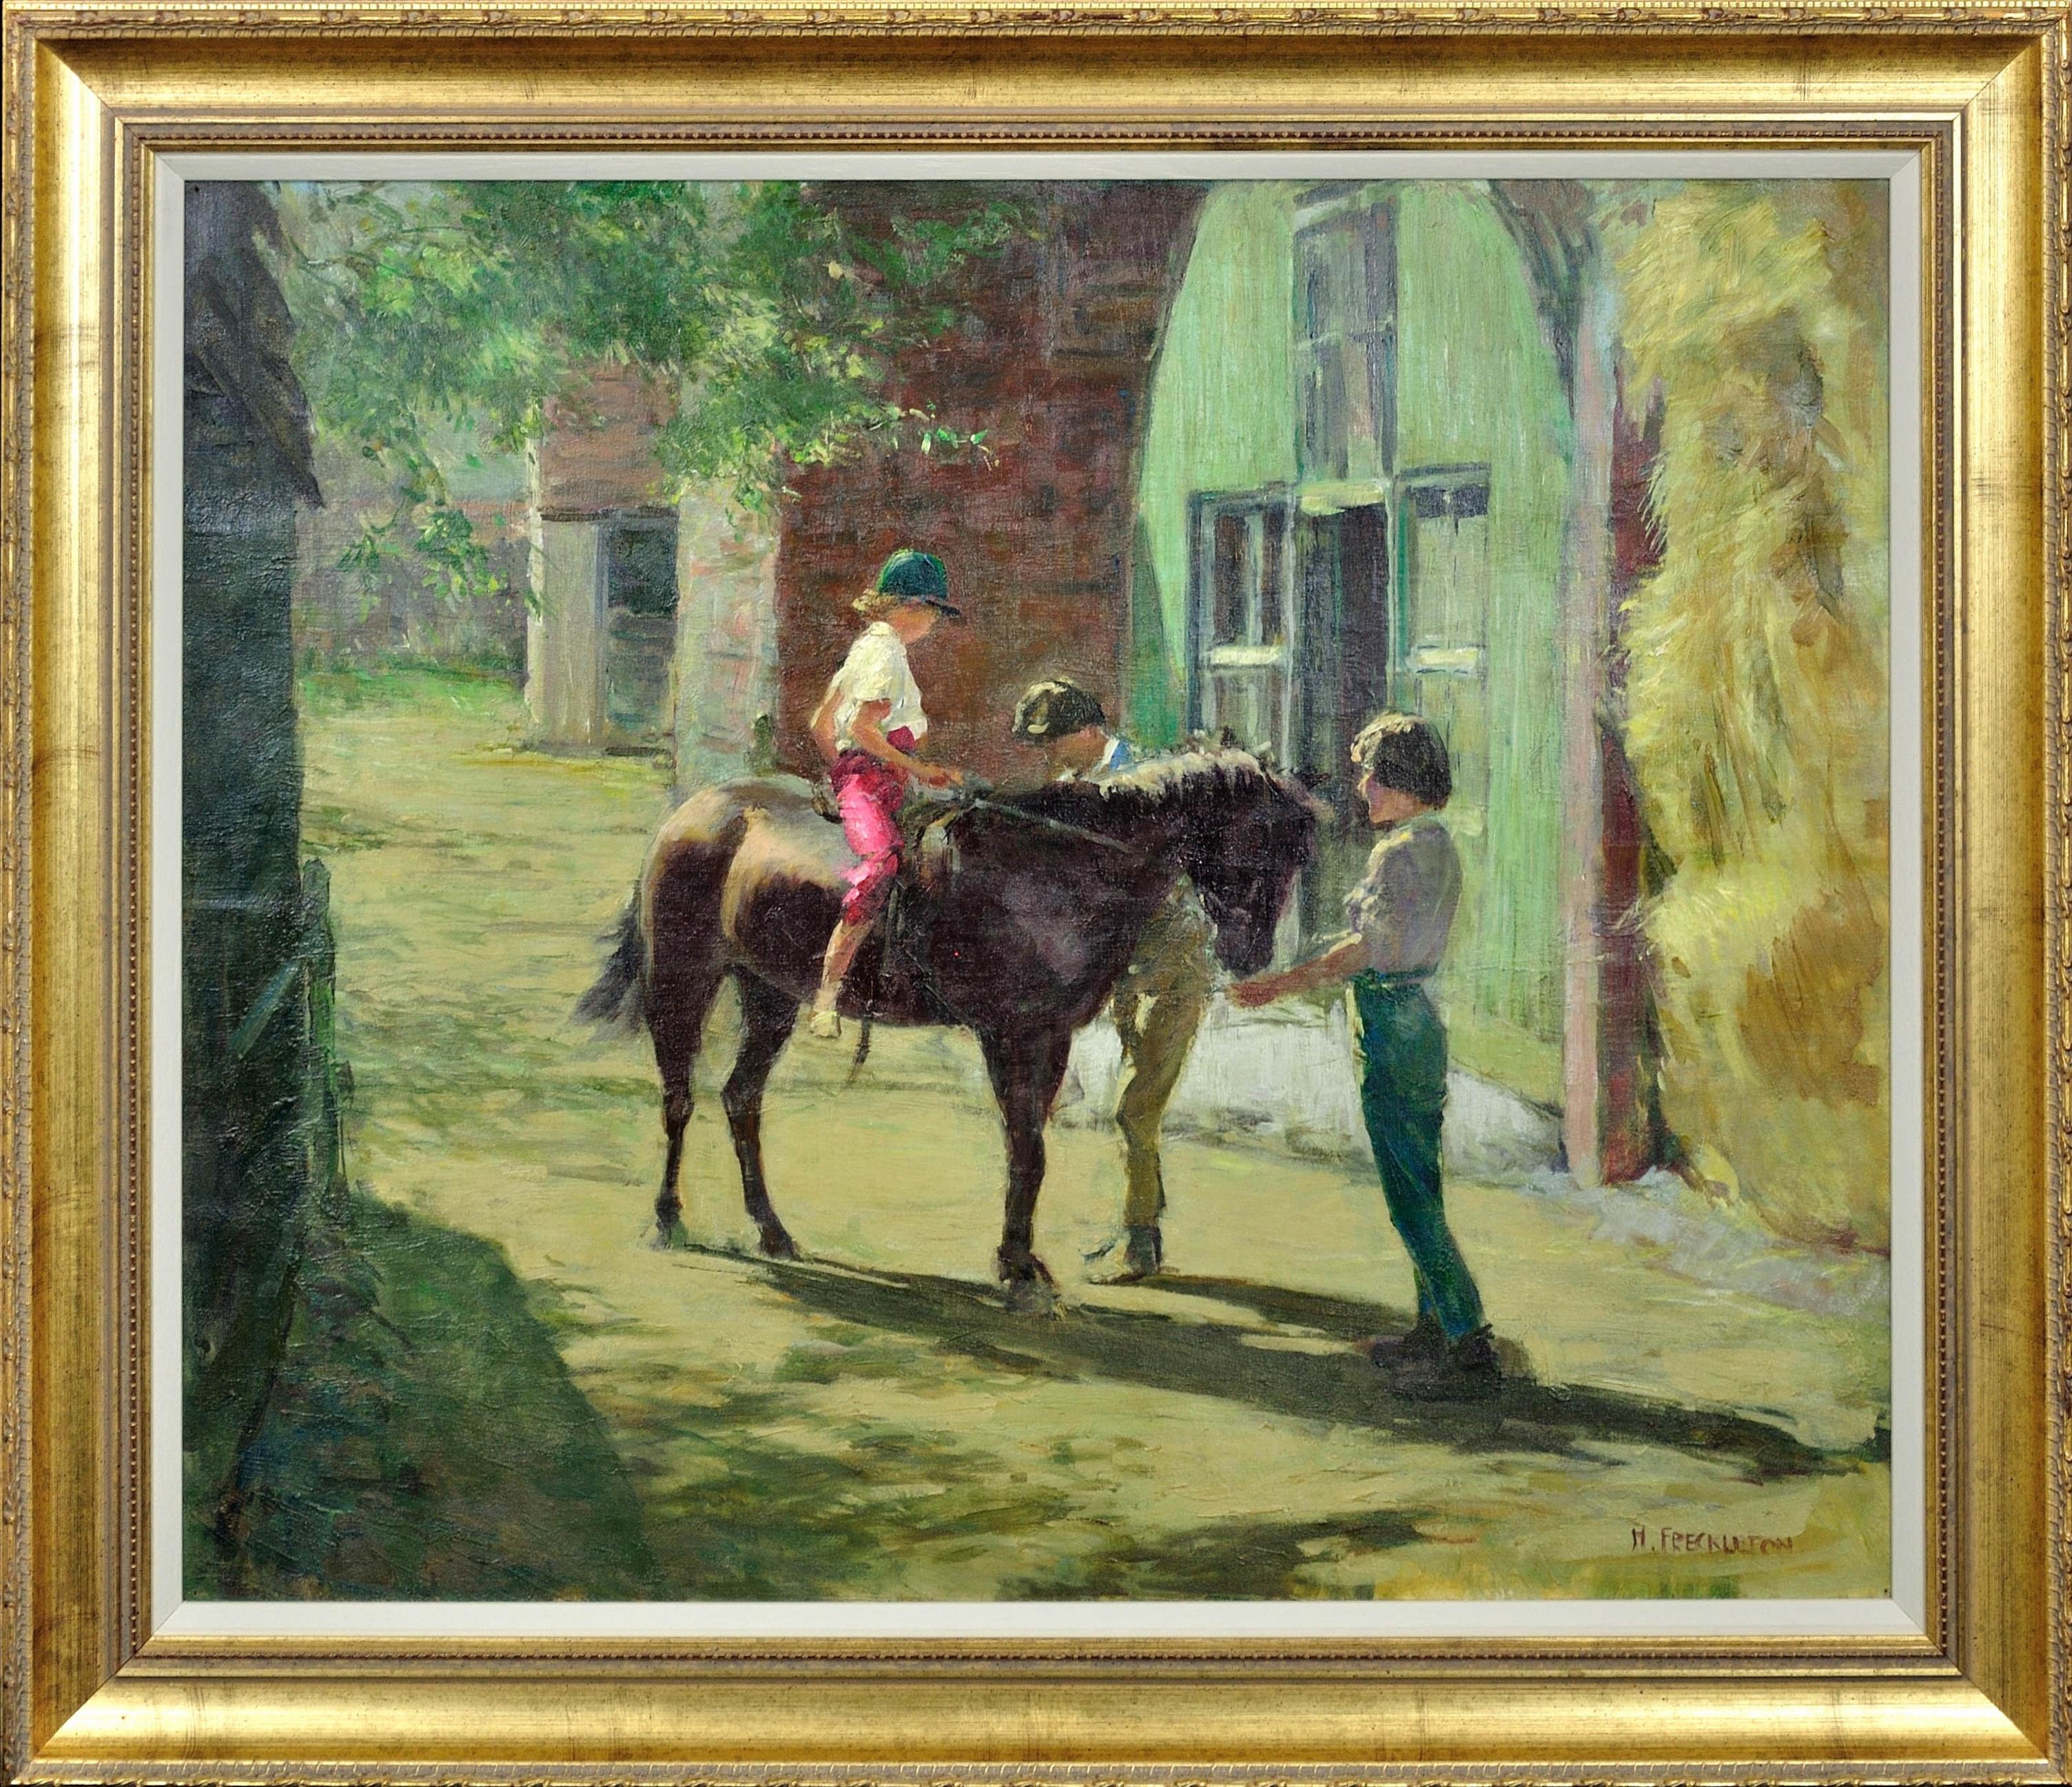 Milly with Minstrel. Children with their Pony in Dappled Summer Sunlight. - Painting by Harold Walton Freckleton